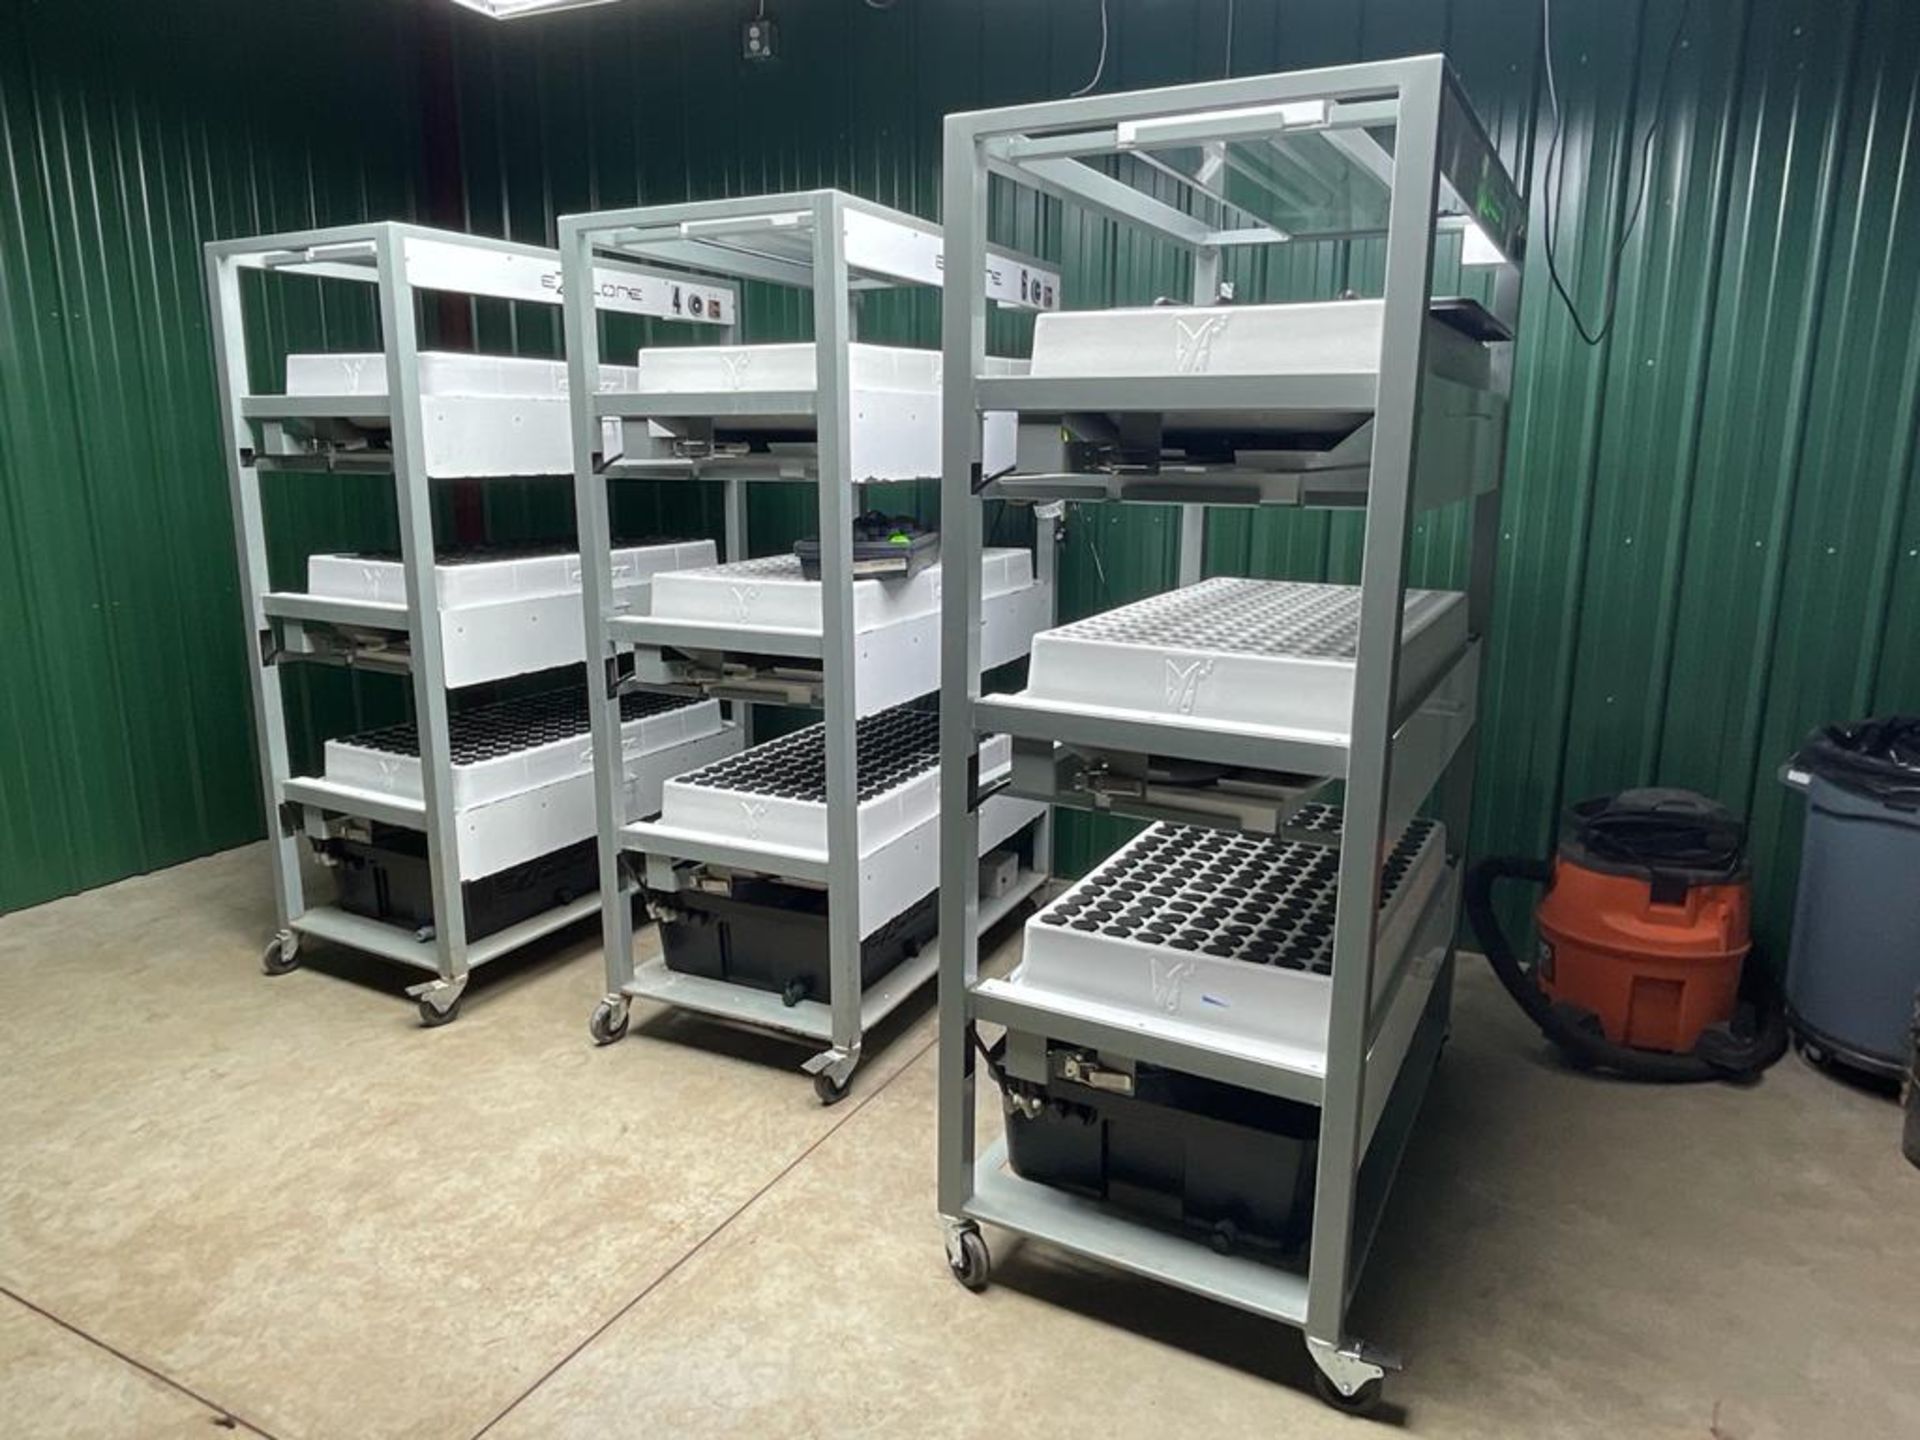 Lot of of (3) EZ-CLONE Low Pro Aeroponic Systems.